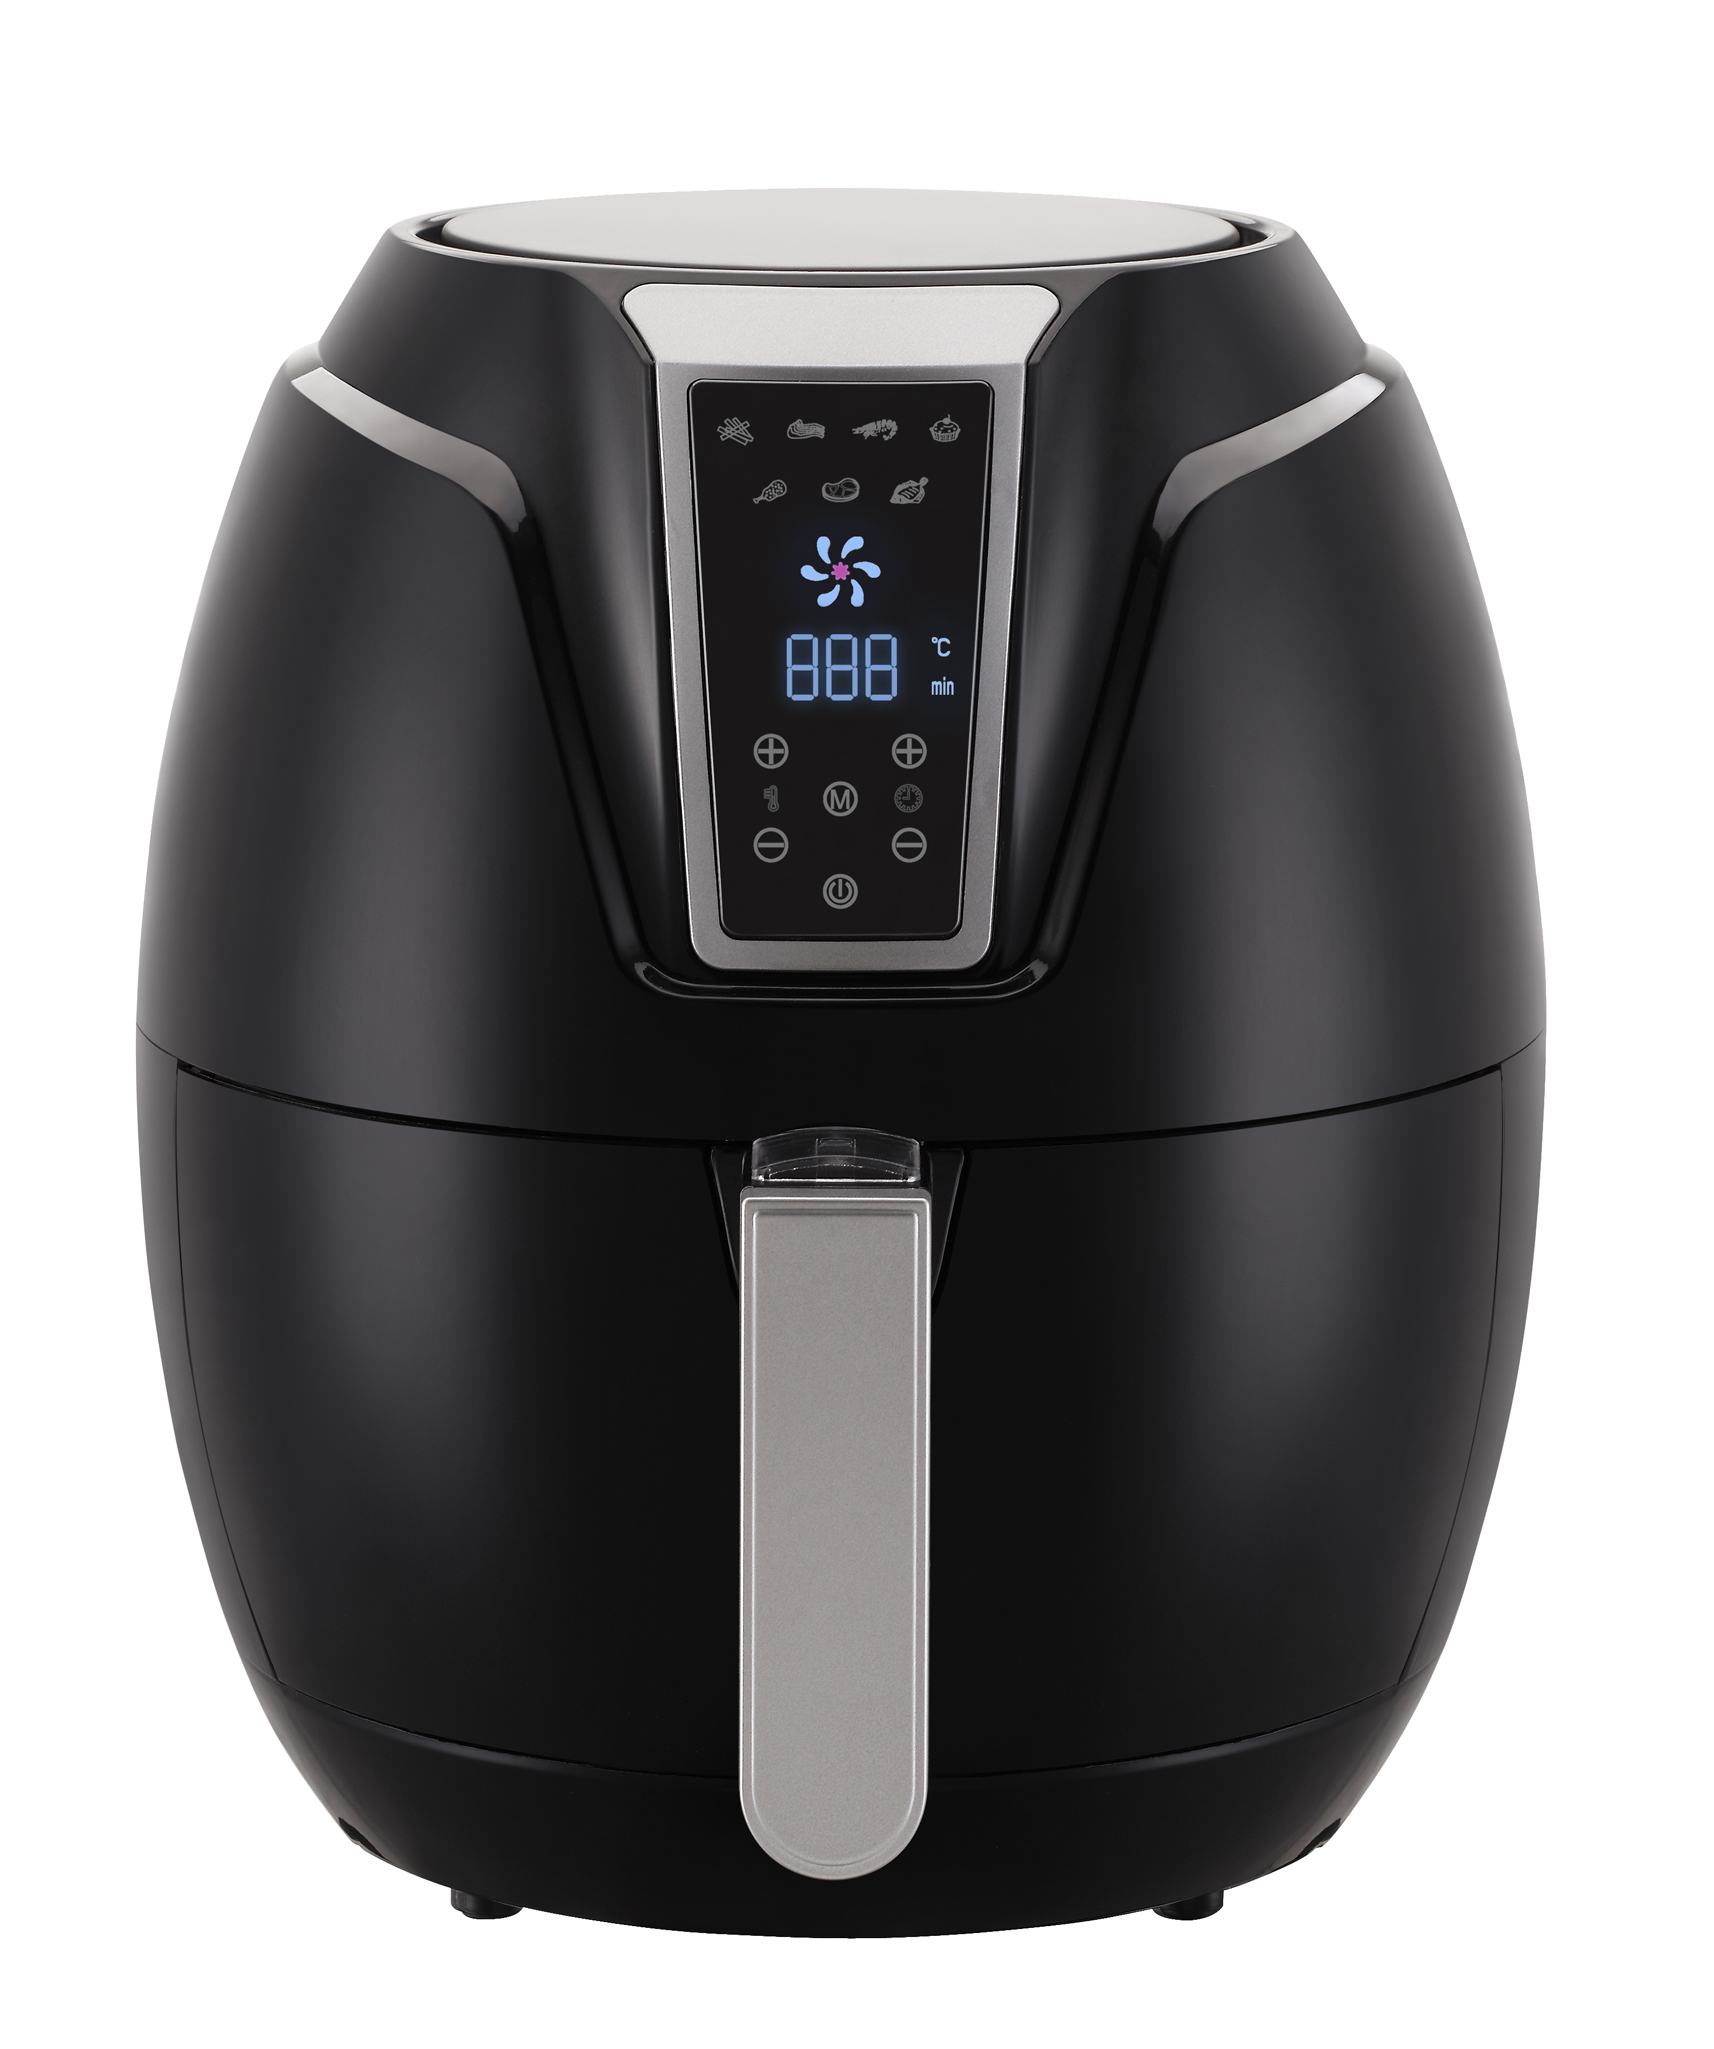 GRT-GLA610 Household Air Fryer Large Capacity Electric Fryer Fries